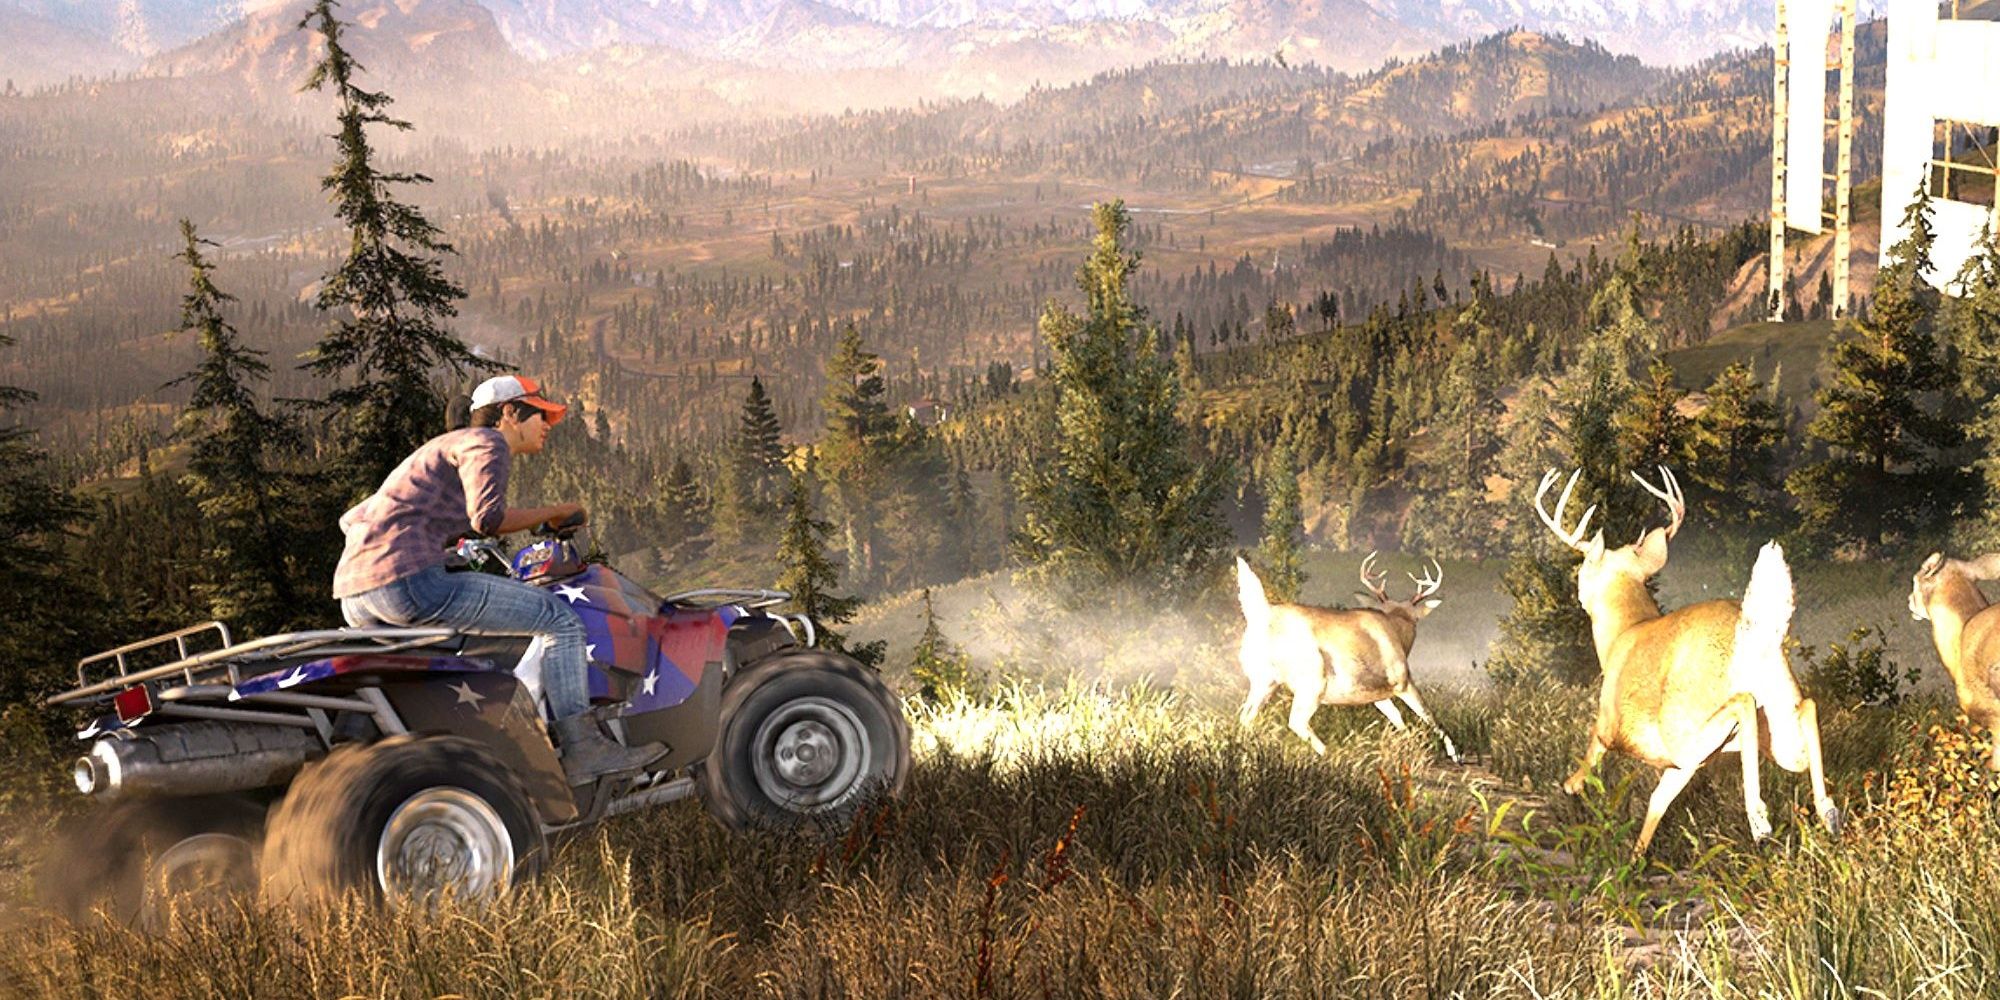 FarCry5, riding ATV's down a hill with deer